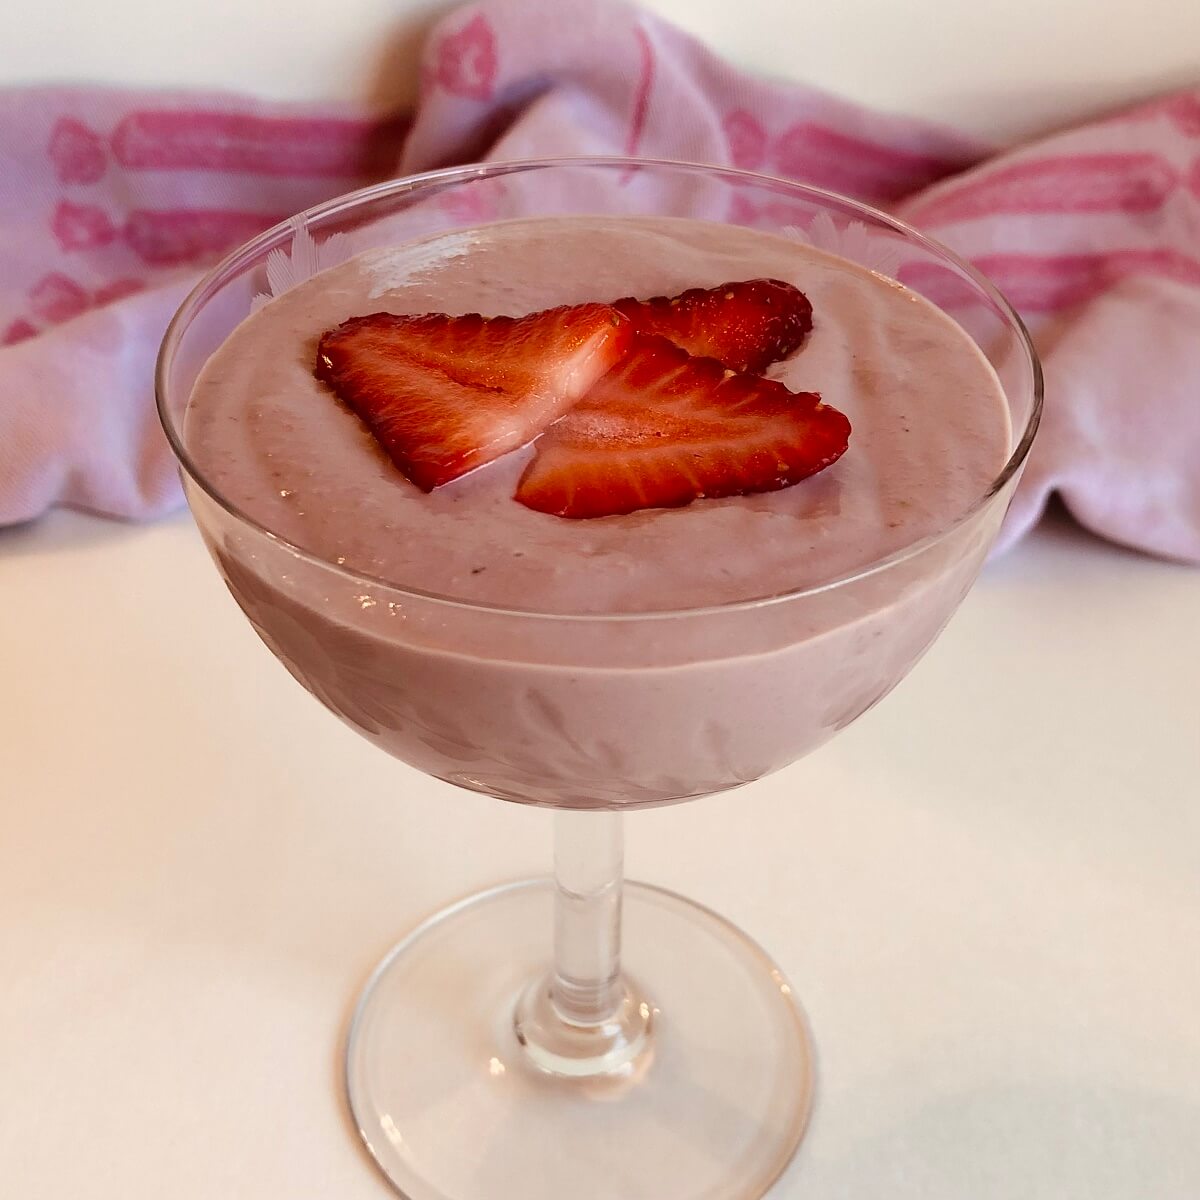 Vegan strawberry mousse in a glass dish.